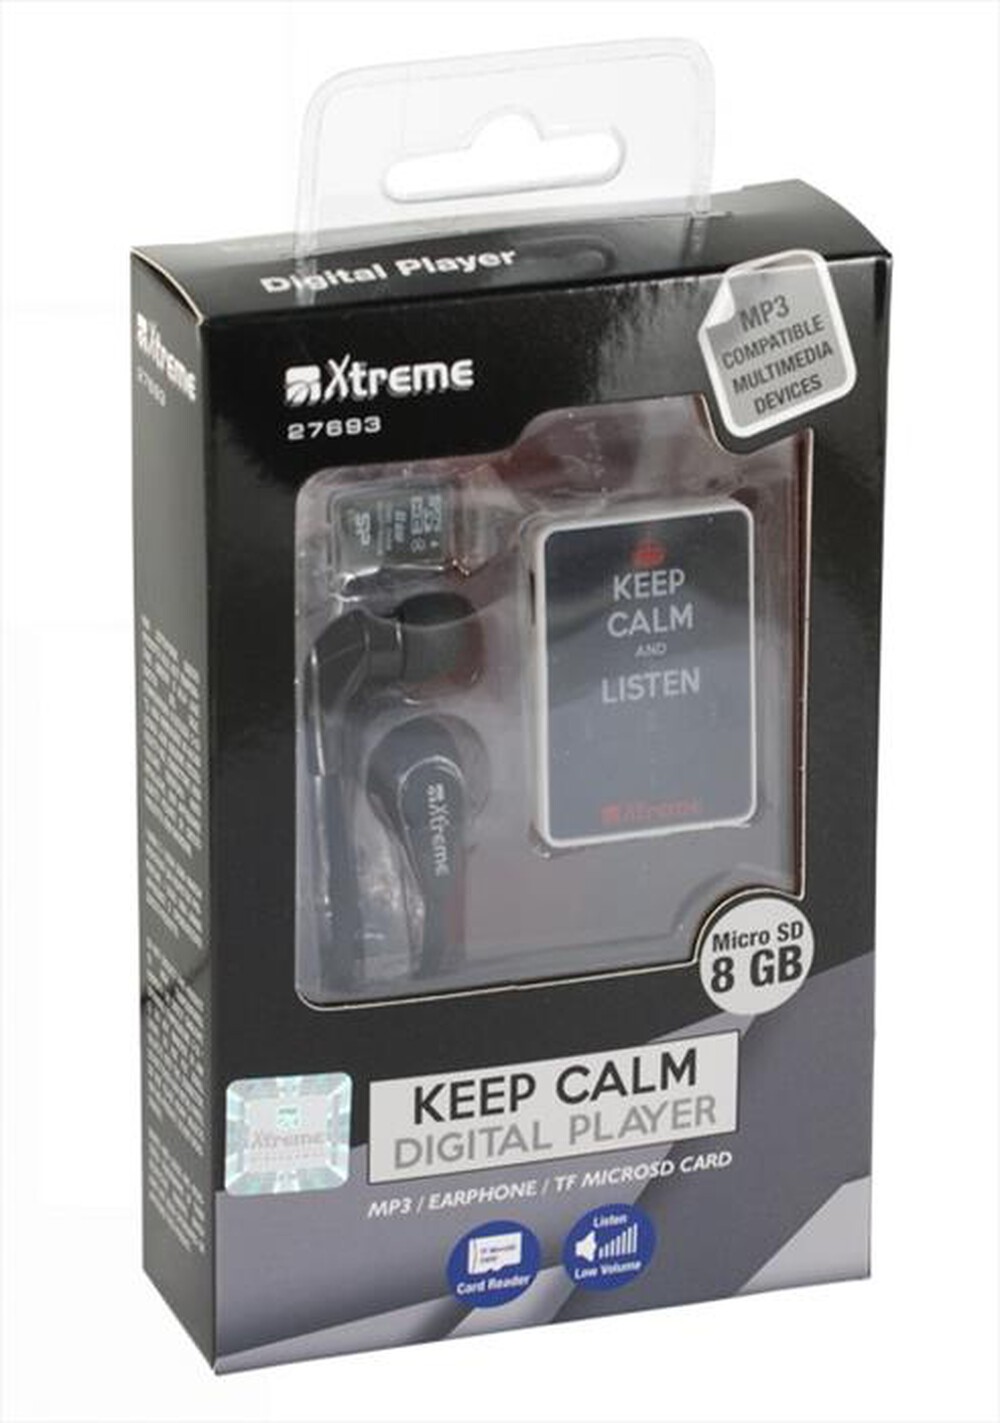 "XTREME - 27693 - Lettore file KEEP CALM"